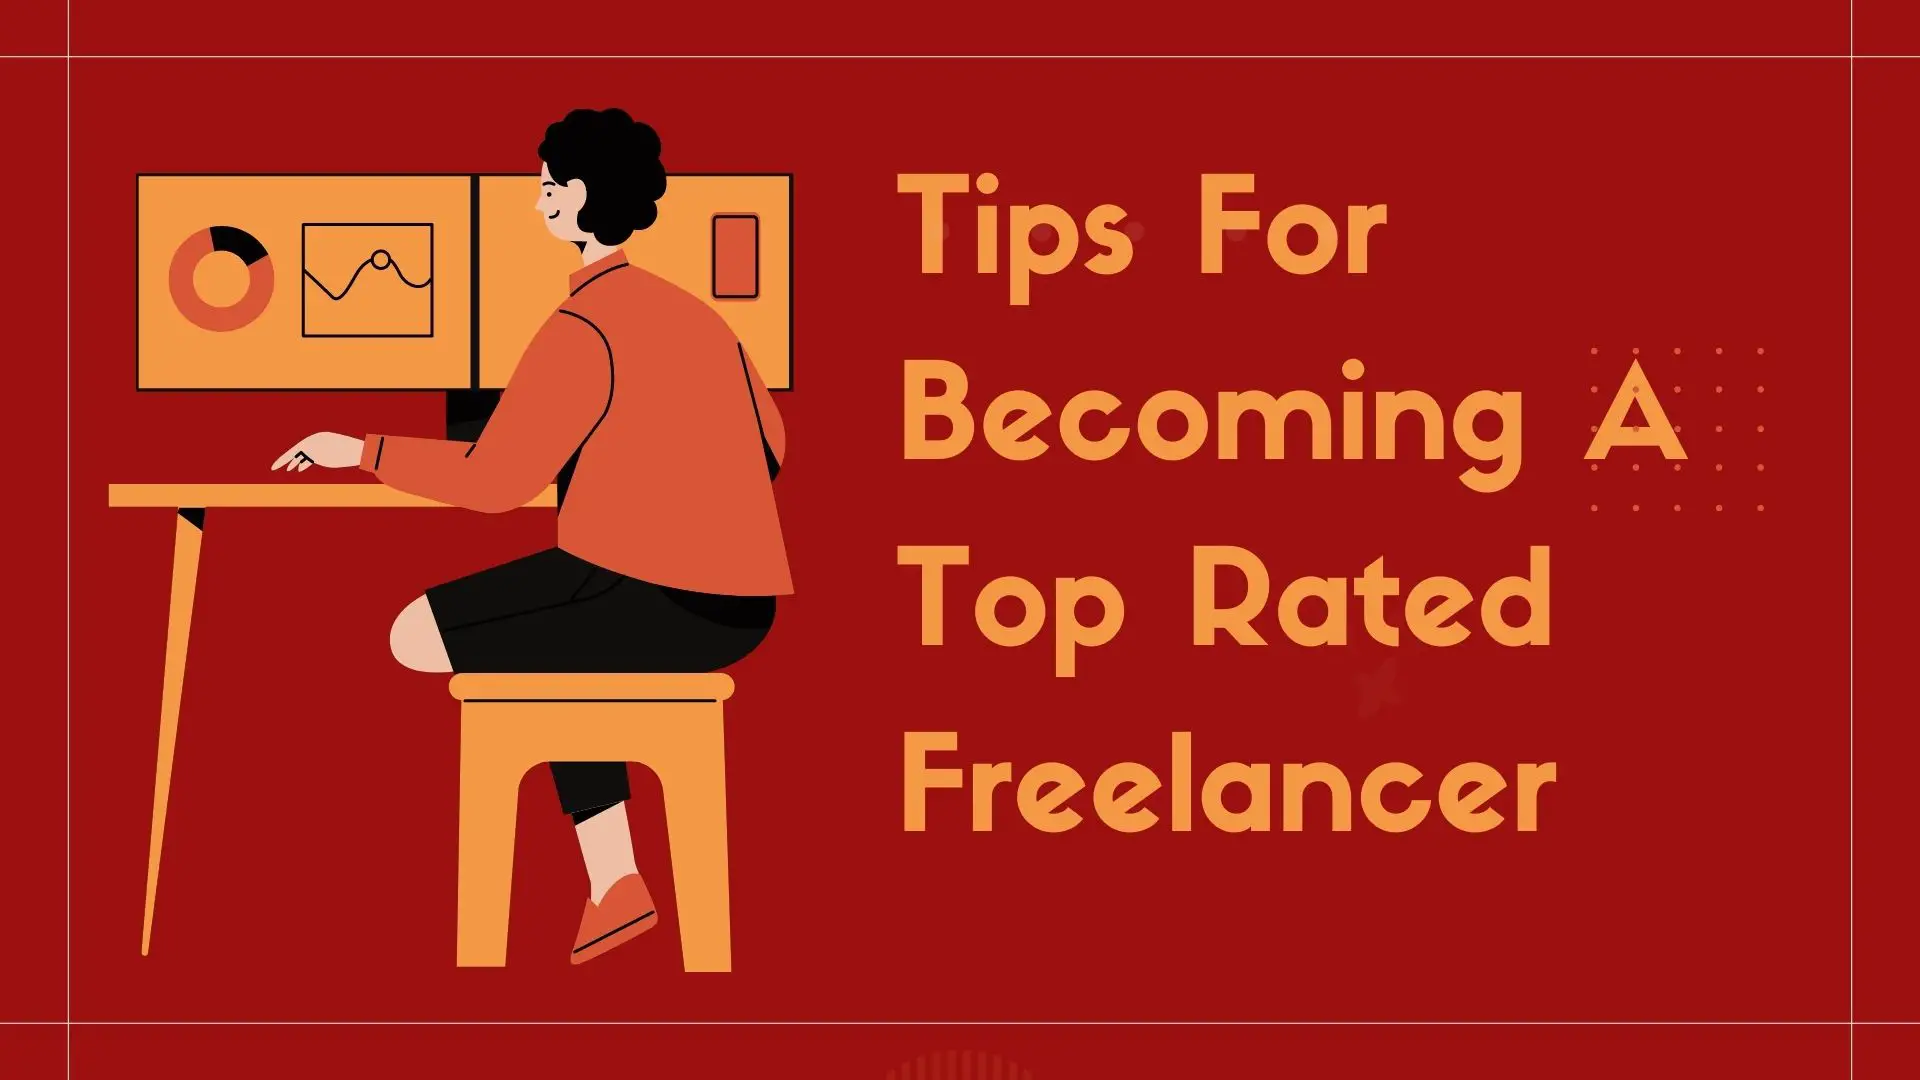 Tips For Becoming A Top Rated Freelancer